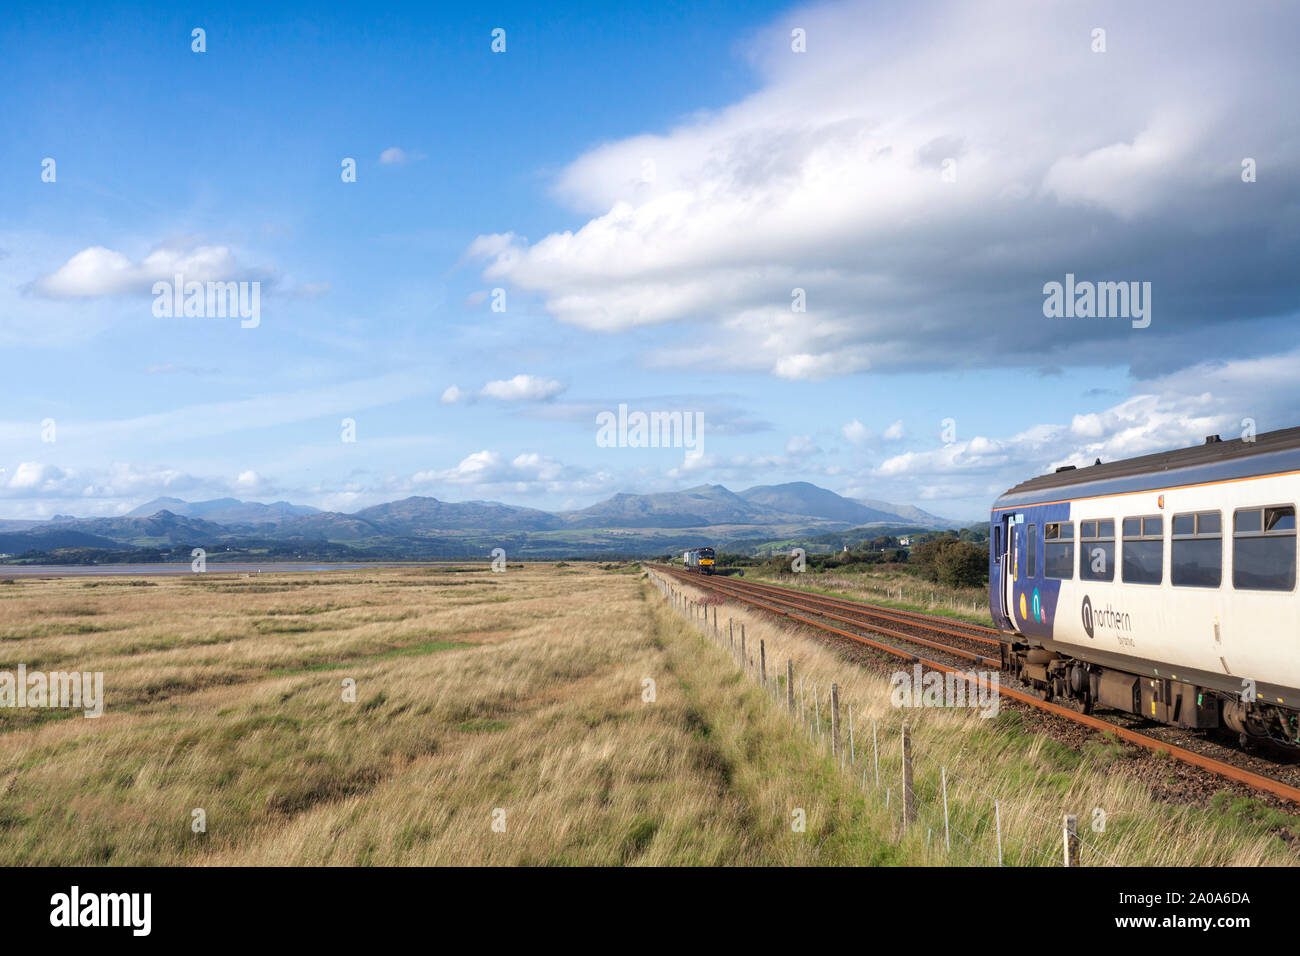 2 Direct rail services class 88 locomotives at Dunnerhome on the Cumbrian coast line with a nuclear flask train passing a Northern rail class 156 Stock Photo